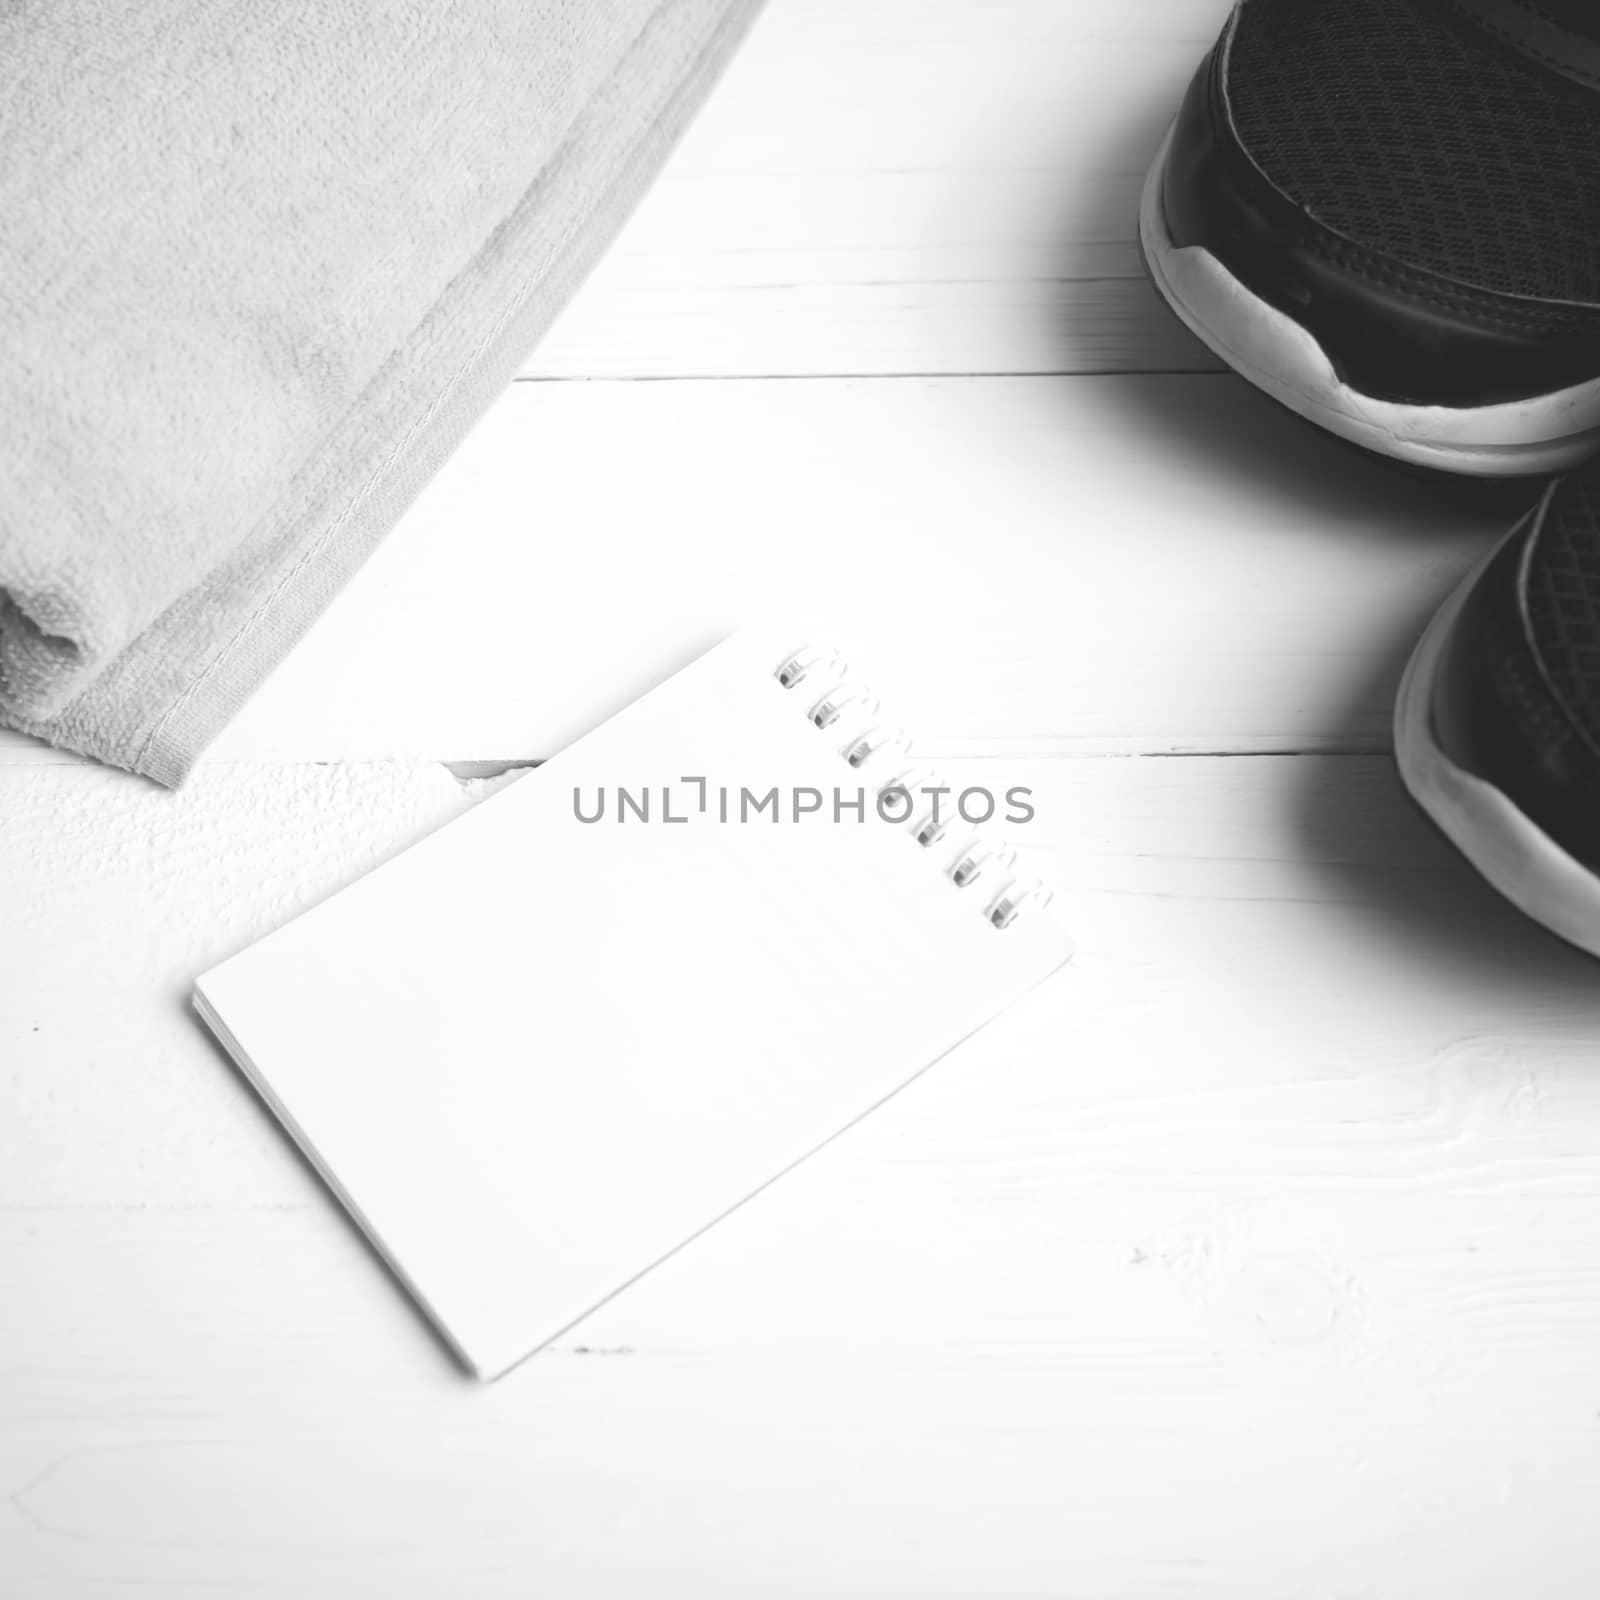 fitness equipment : running shoes,towel and notepad on white wood table black and white color style